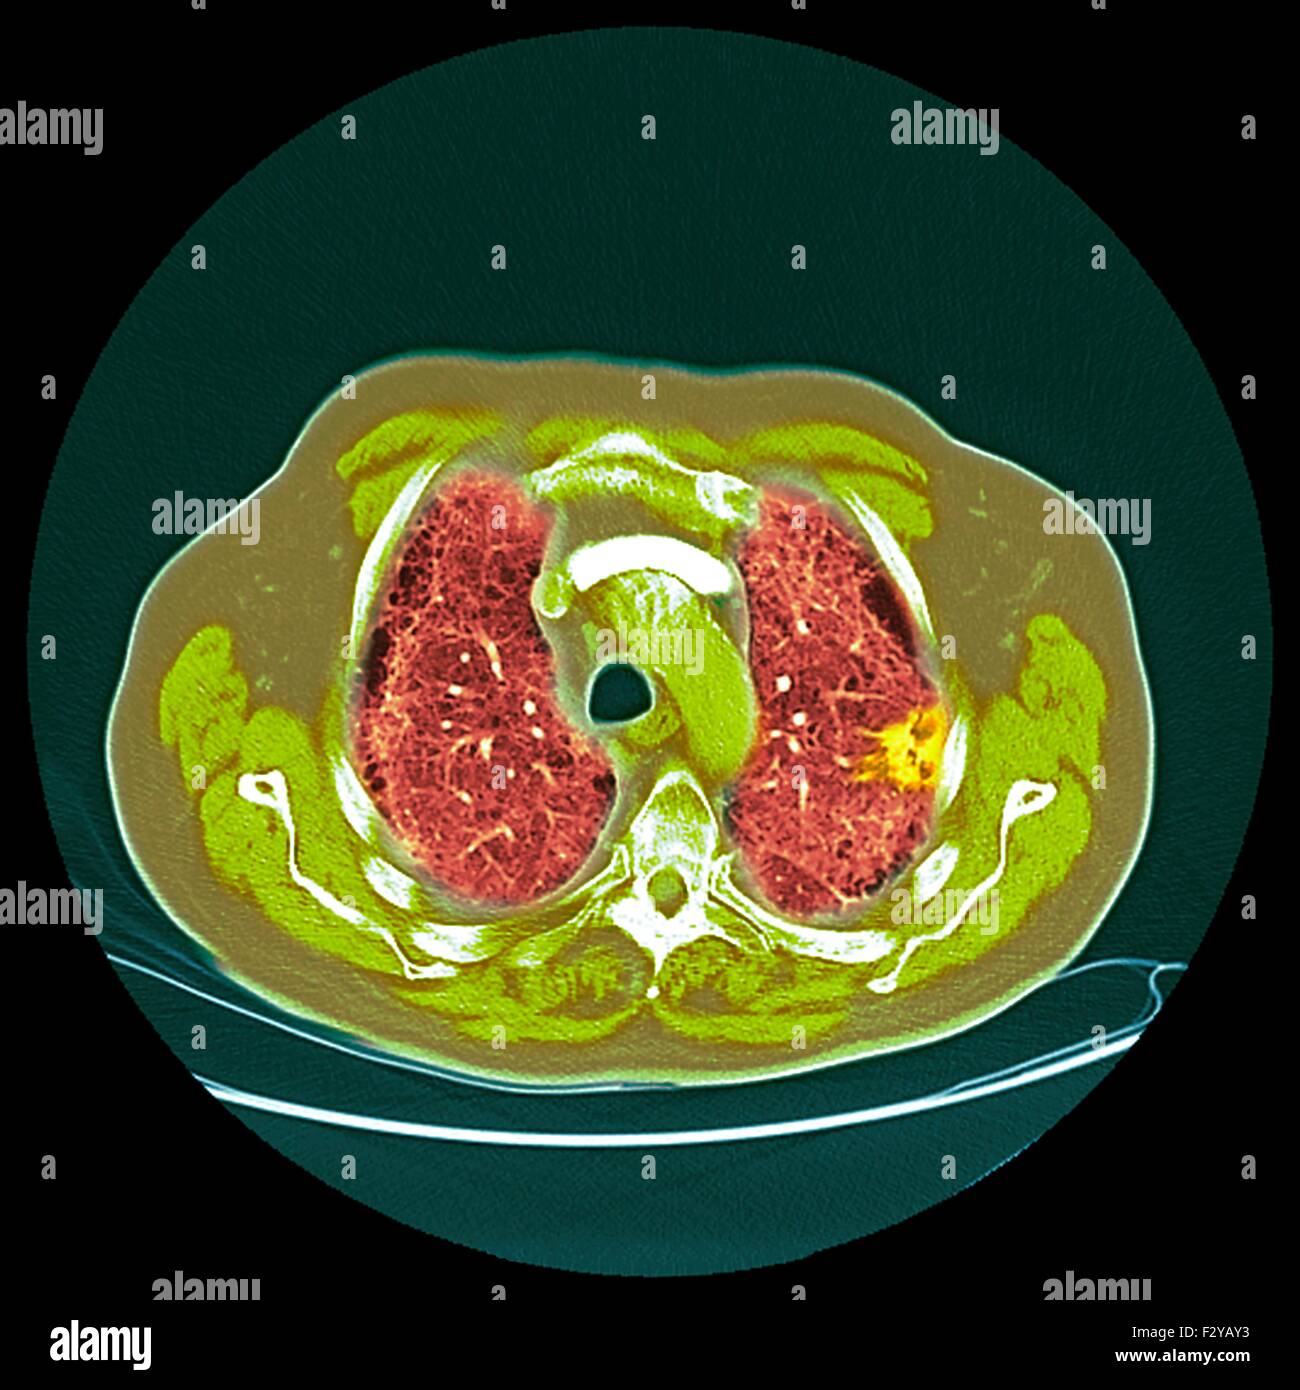 Lung cancer. Coloured computed tomography (CT) scan of a section through the chest of a 76-year-old male patient with a malignant (cancerous) tumour (bright, right) of the bronchus. The bronchi are the airways that carry air to the lungs and mouth. Stock Photo